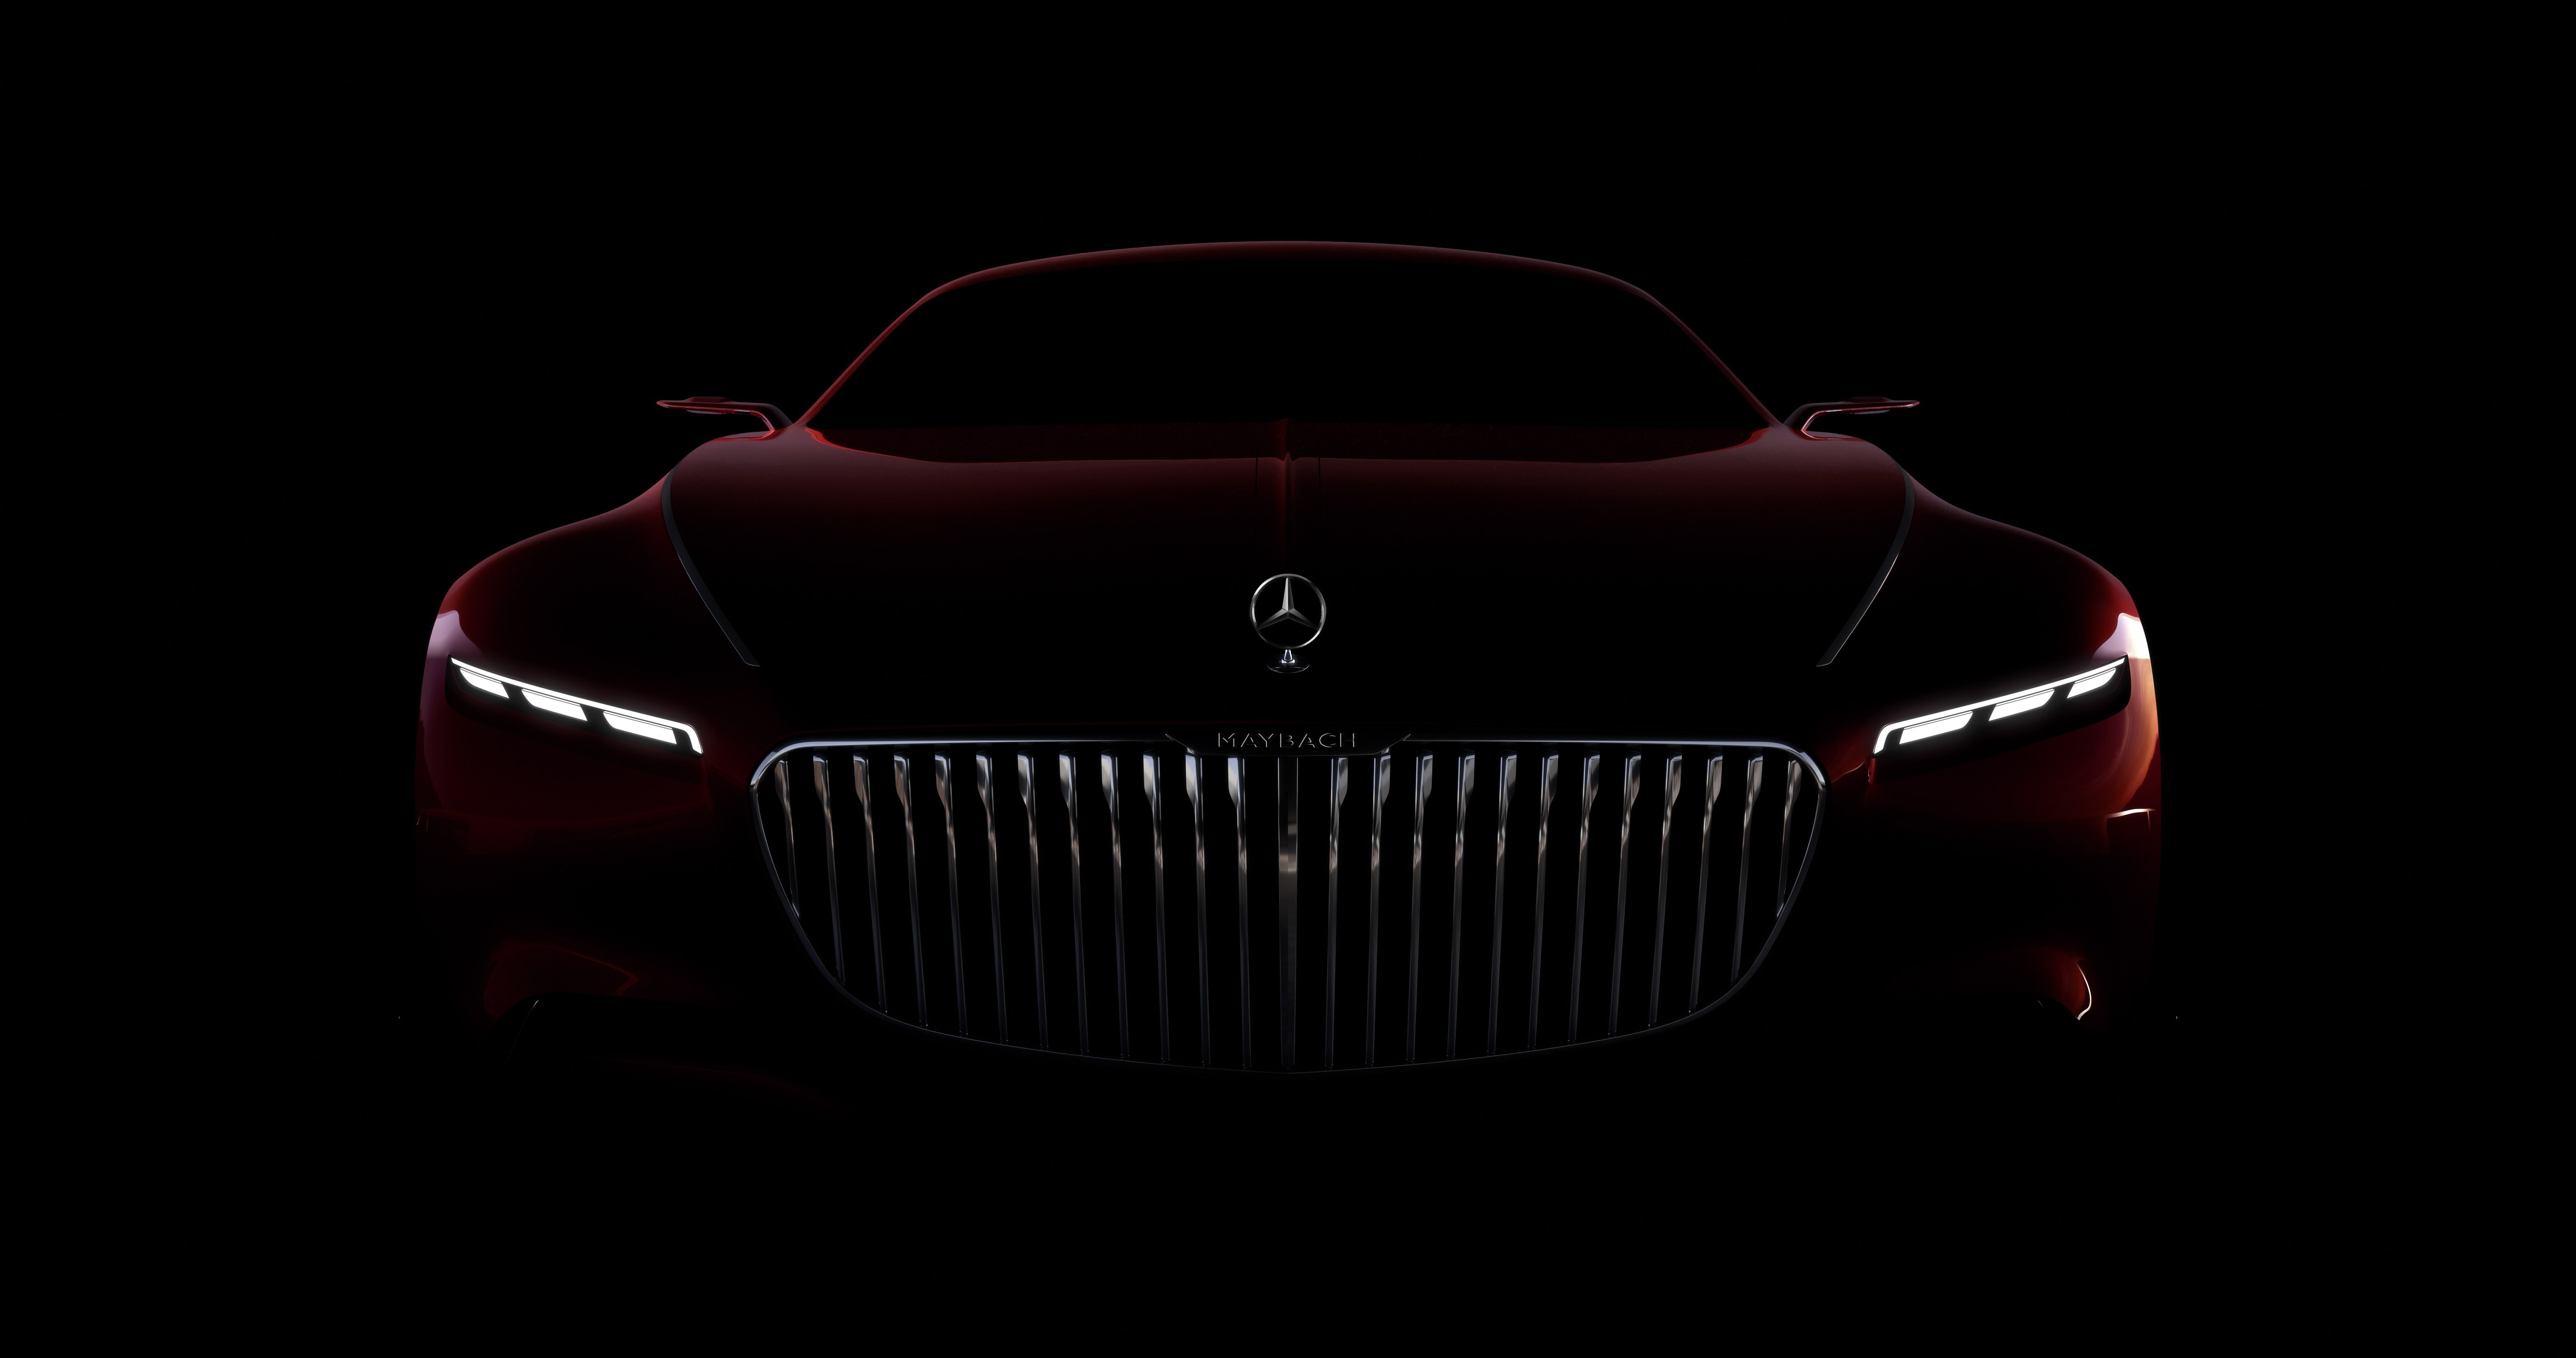 red Mercedes-Benz vehicle, car, wallpaper, black, Maybach, beauty